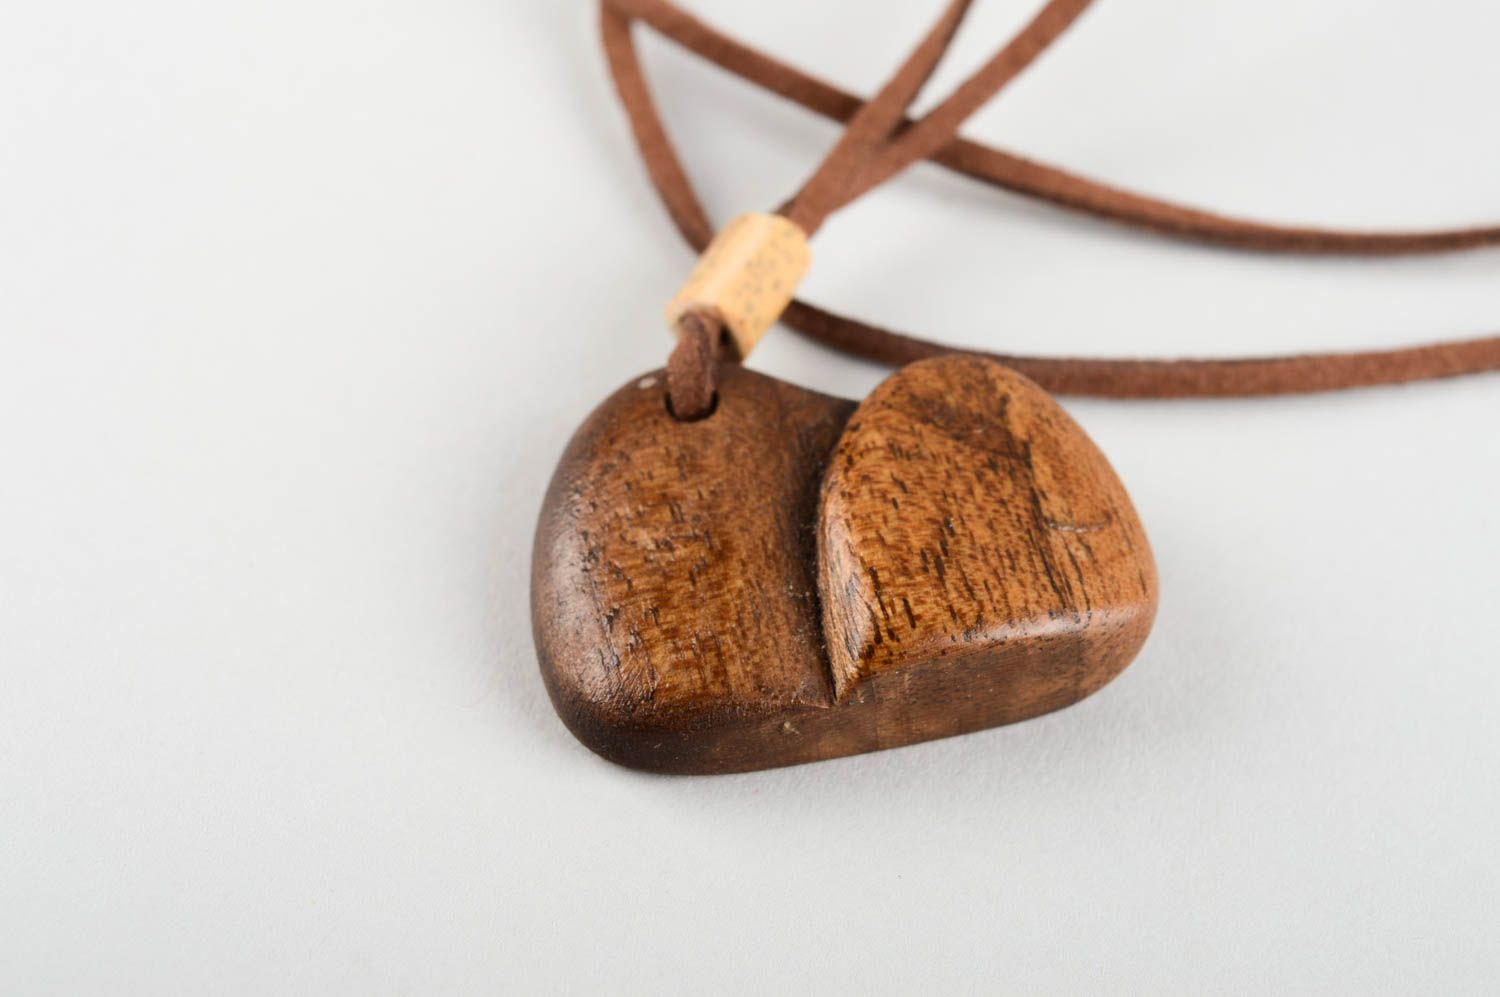 Unusual handmade wooden pendant costume jewelry designs wood craft small gifts photo 3